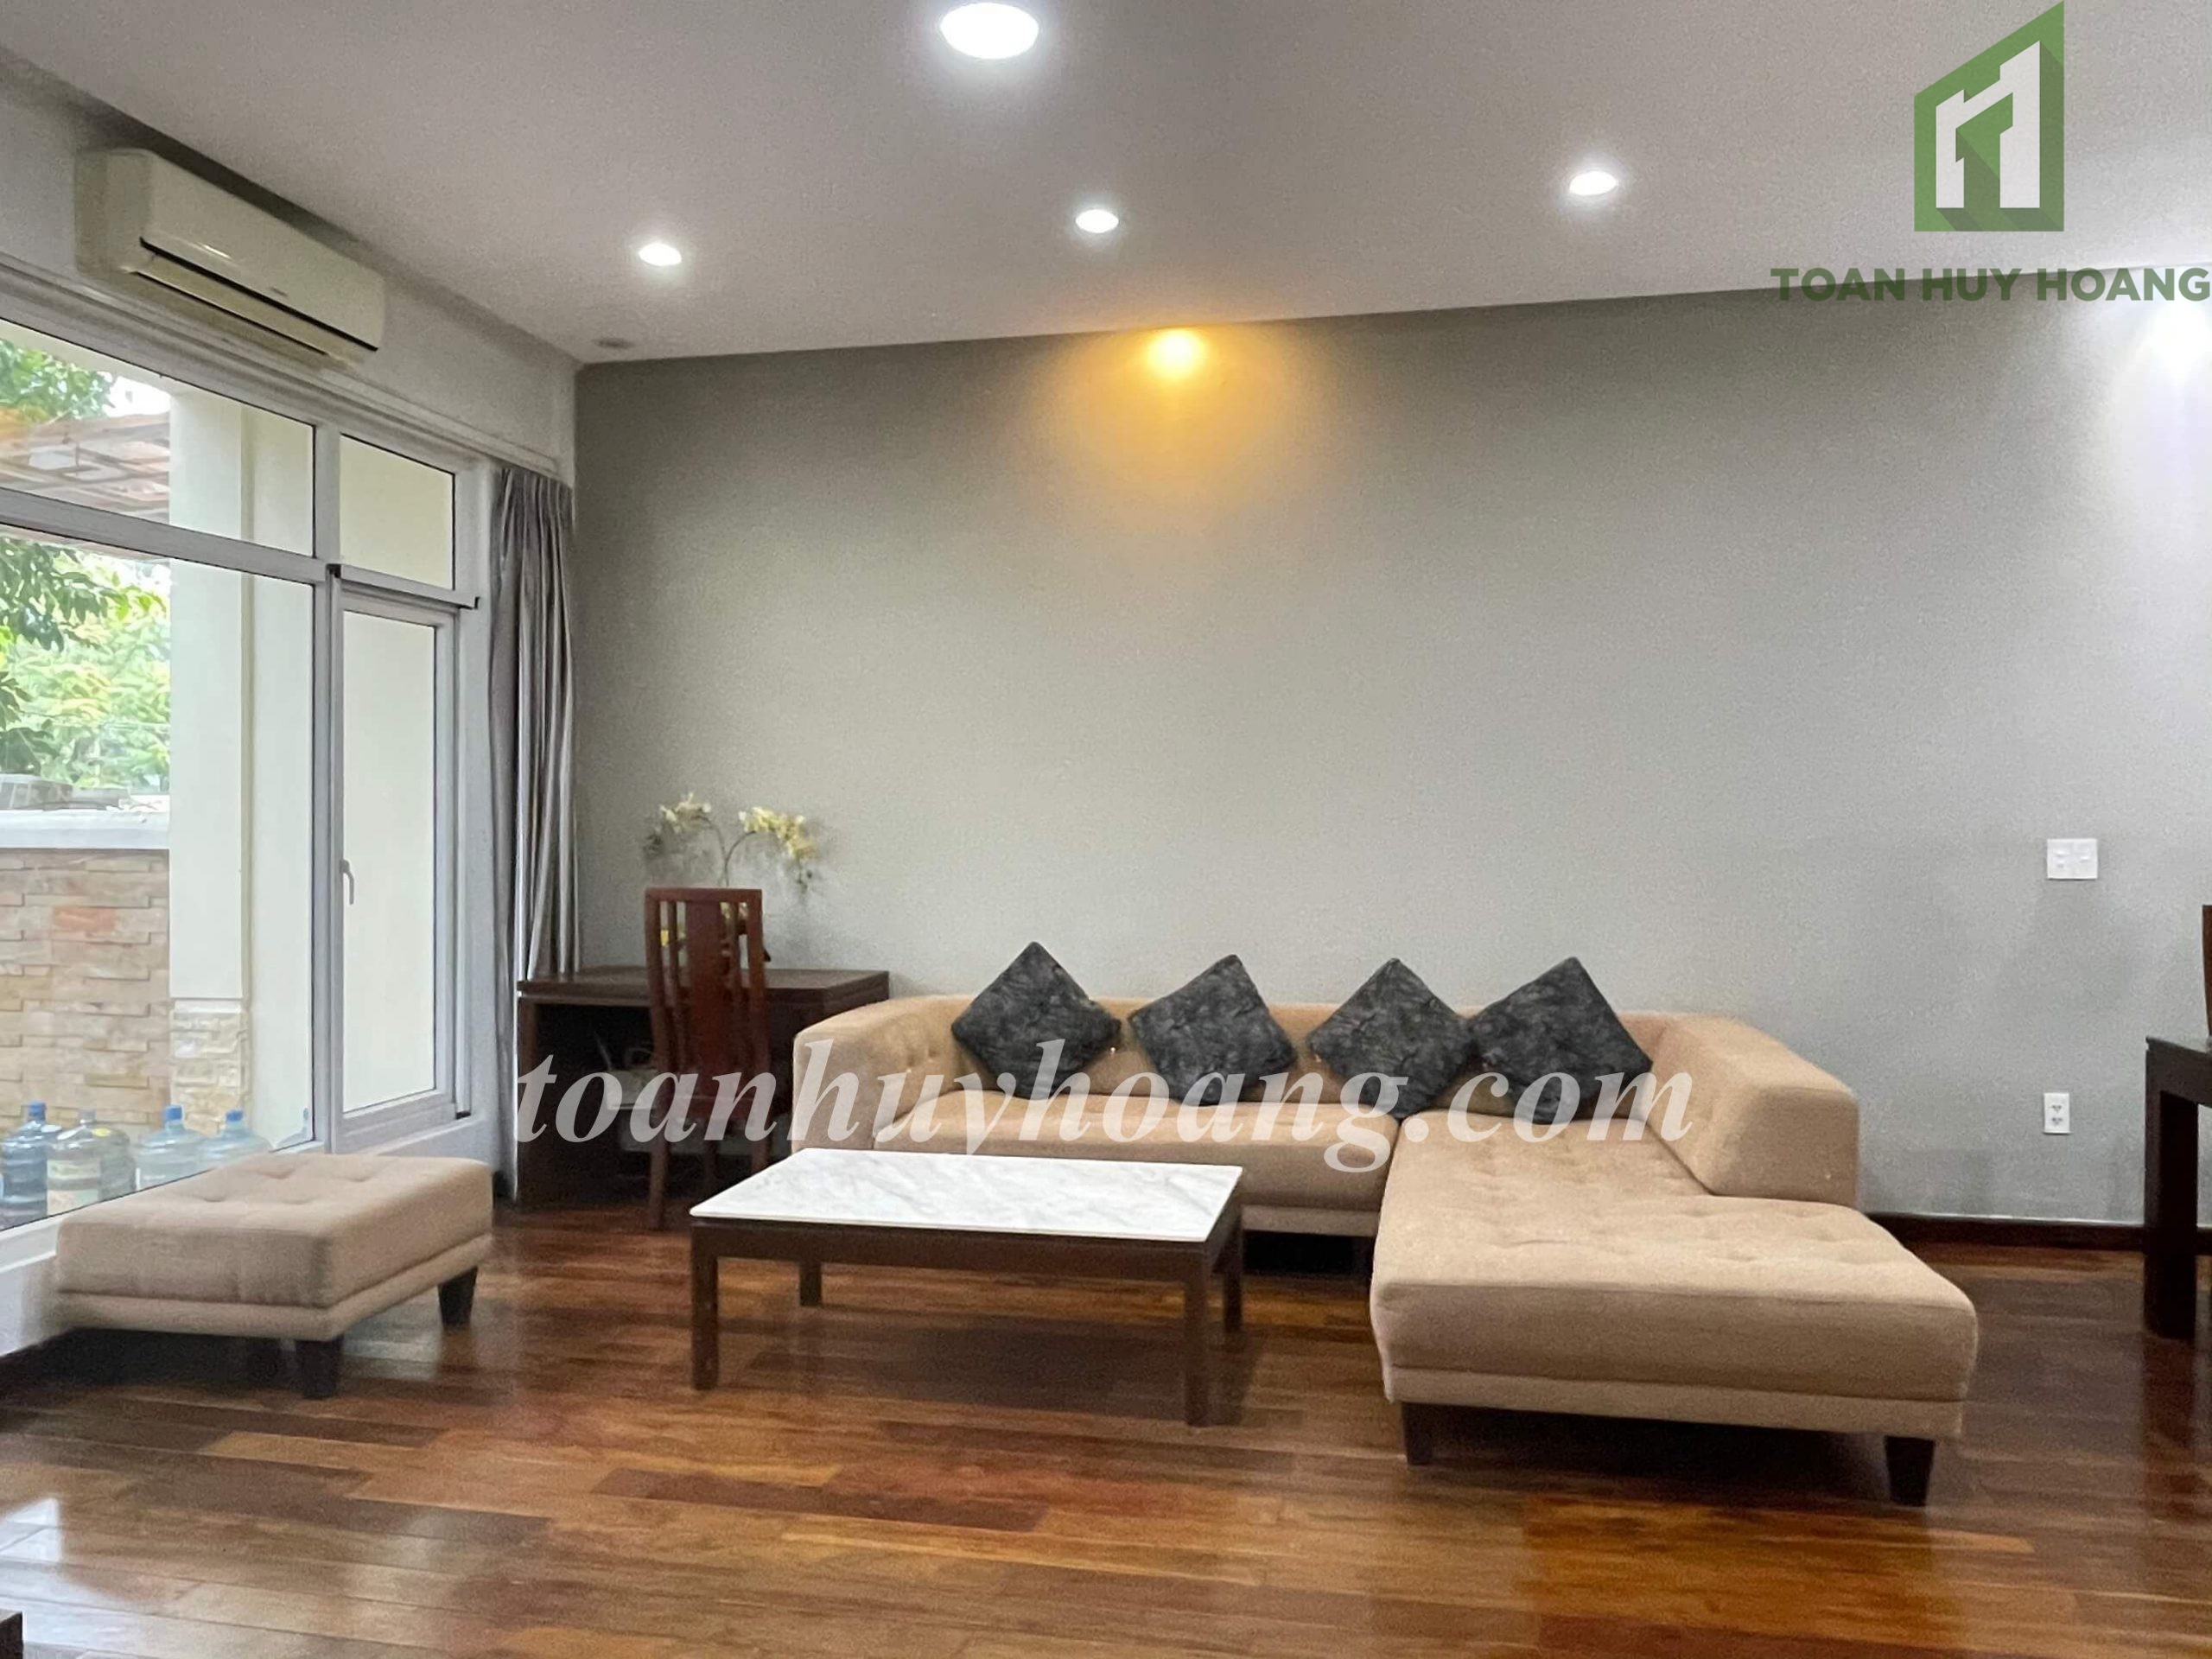 bright and tidy villa for rent in an eco-friendly neighbor